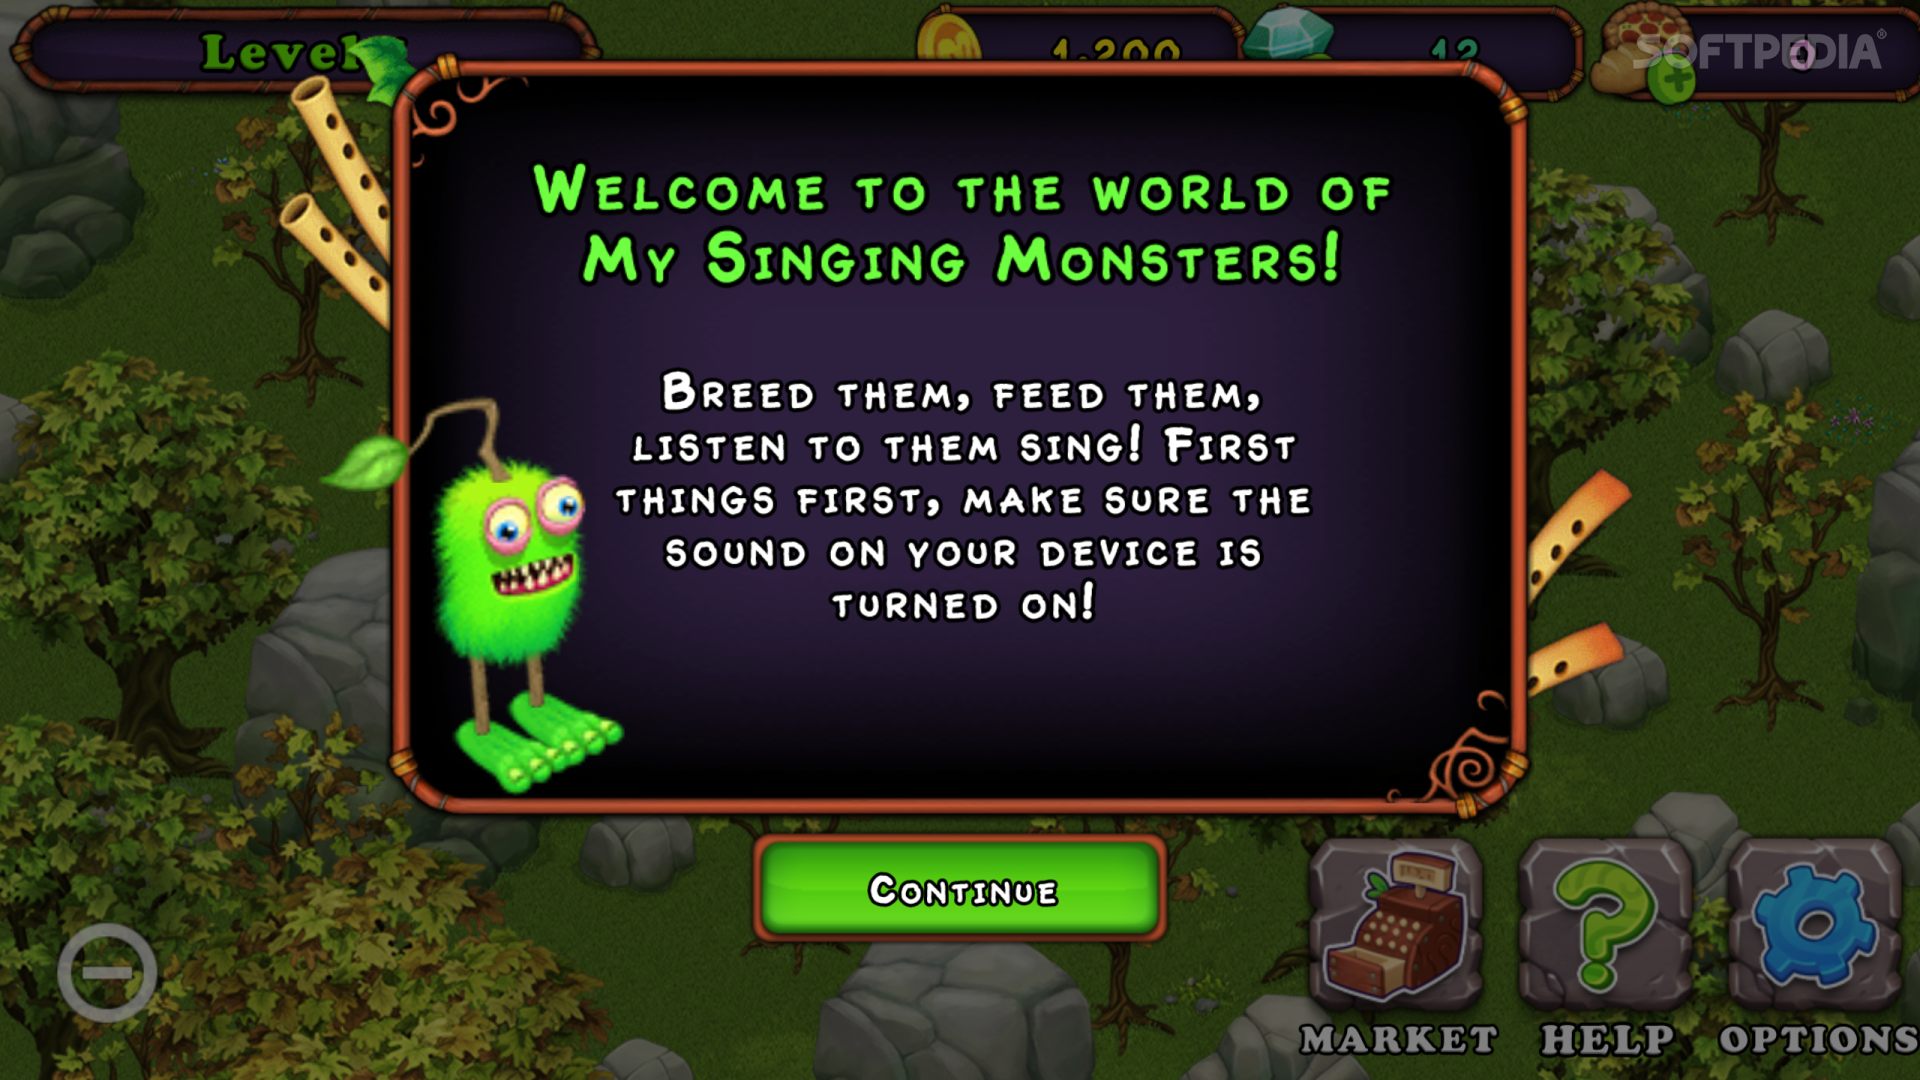 How to breed the g'joob in my singing monsters.